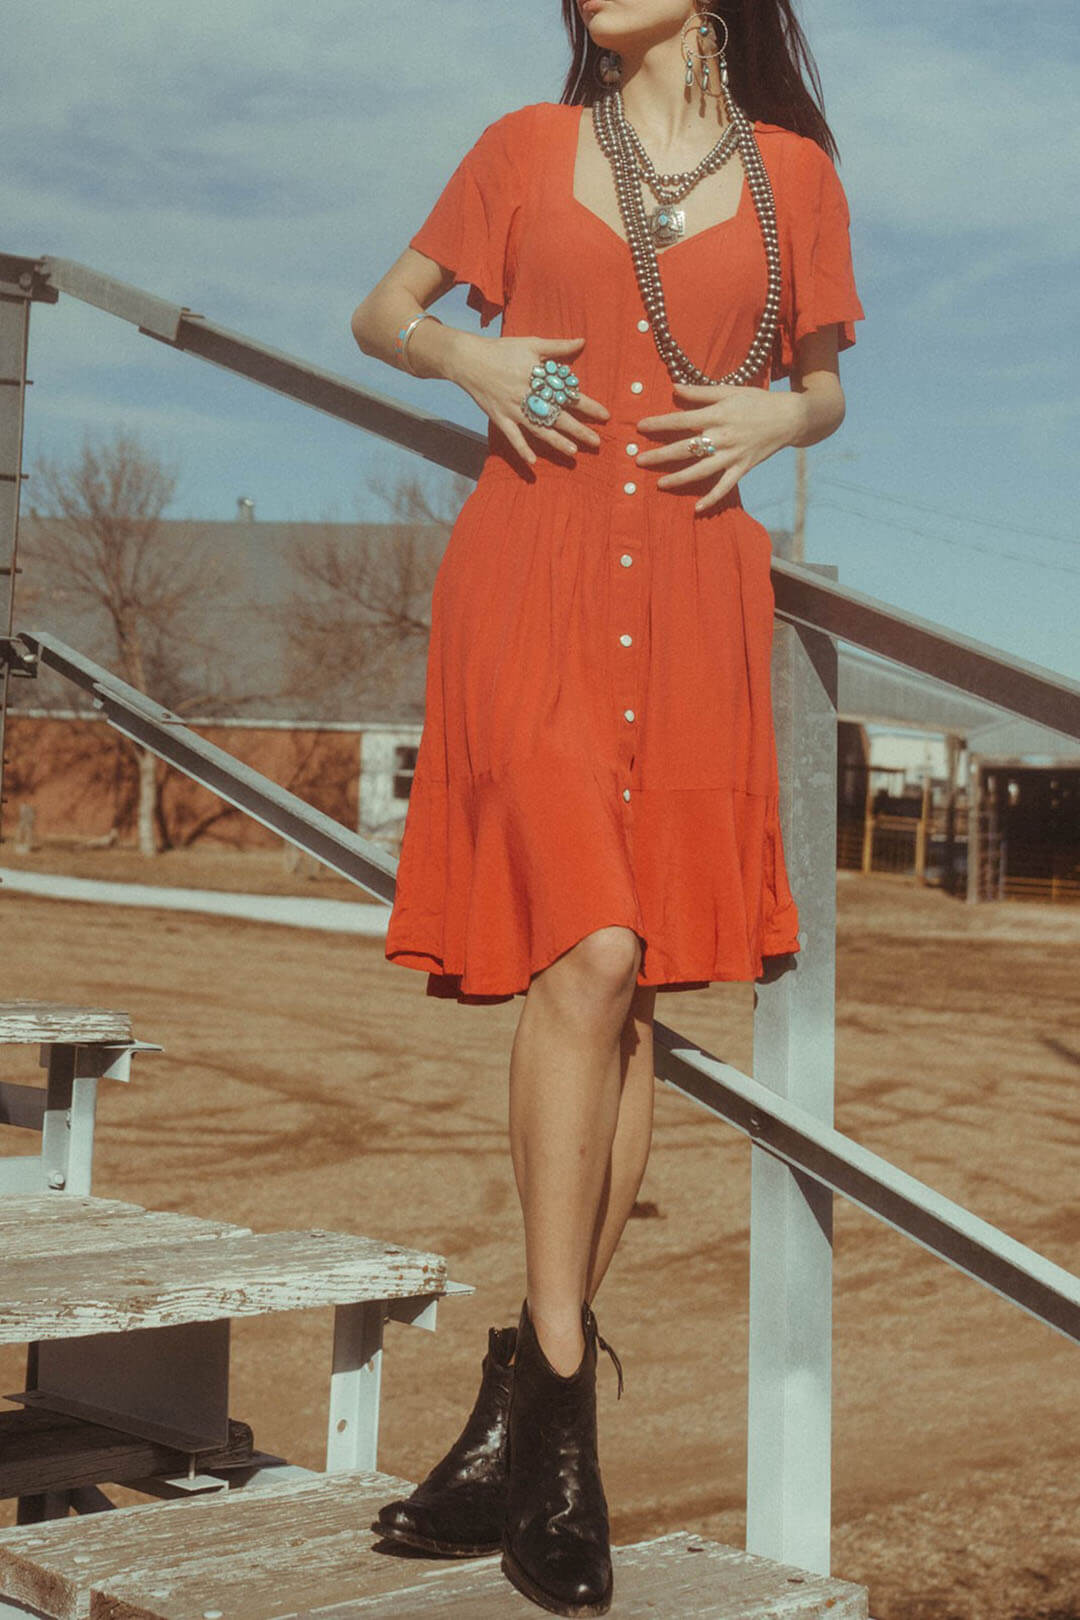 Woman modeling the Wrangler Retro Red Dress.  The dress is V-Neck and features white button snaps down the middle. 